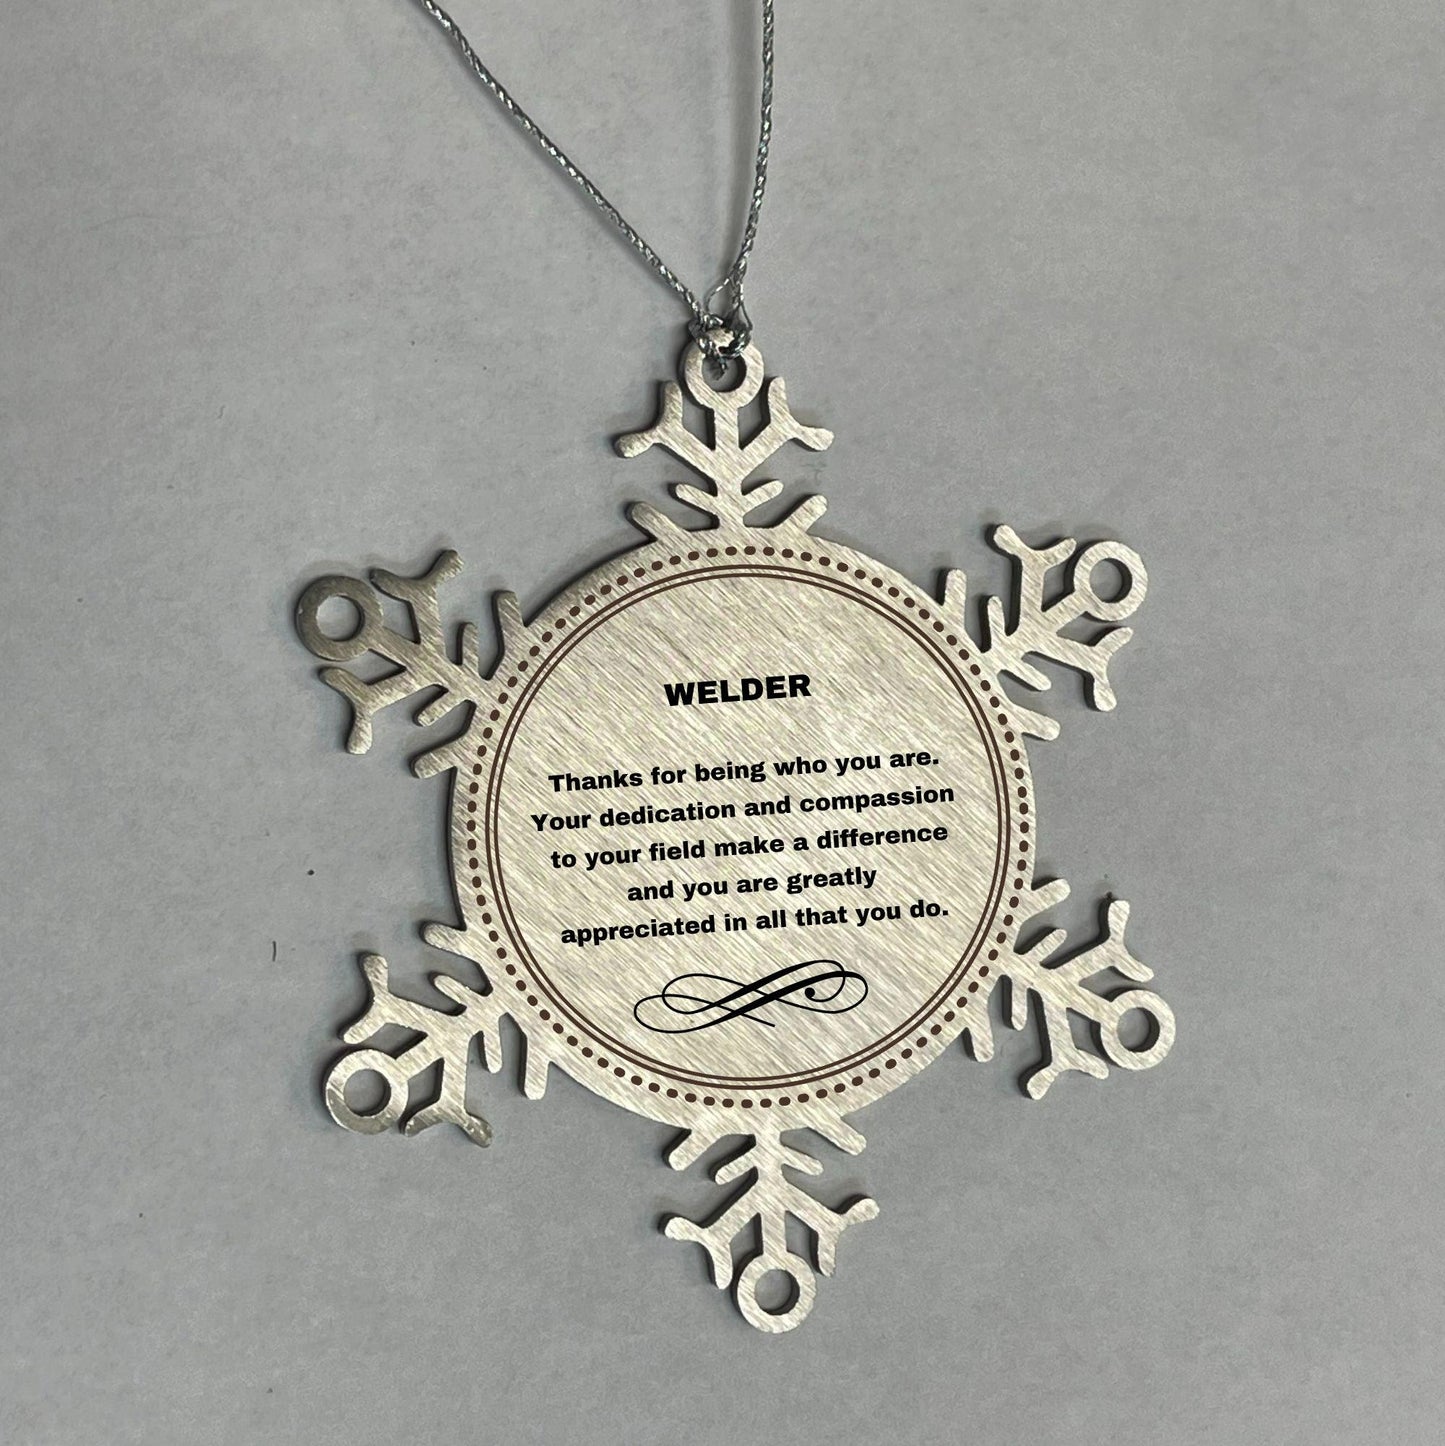 Welder Snowflake Ornament - Thanks for being who you are - Birthday Christmas Jewelry Gifts Coworkers Colleague Boss - Mallard Moon Gift Shop